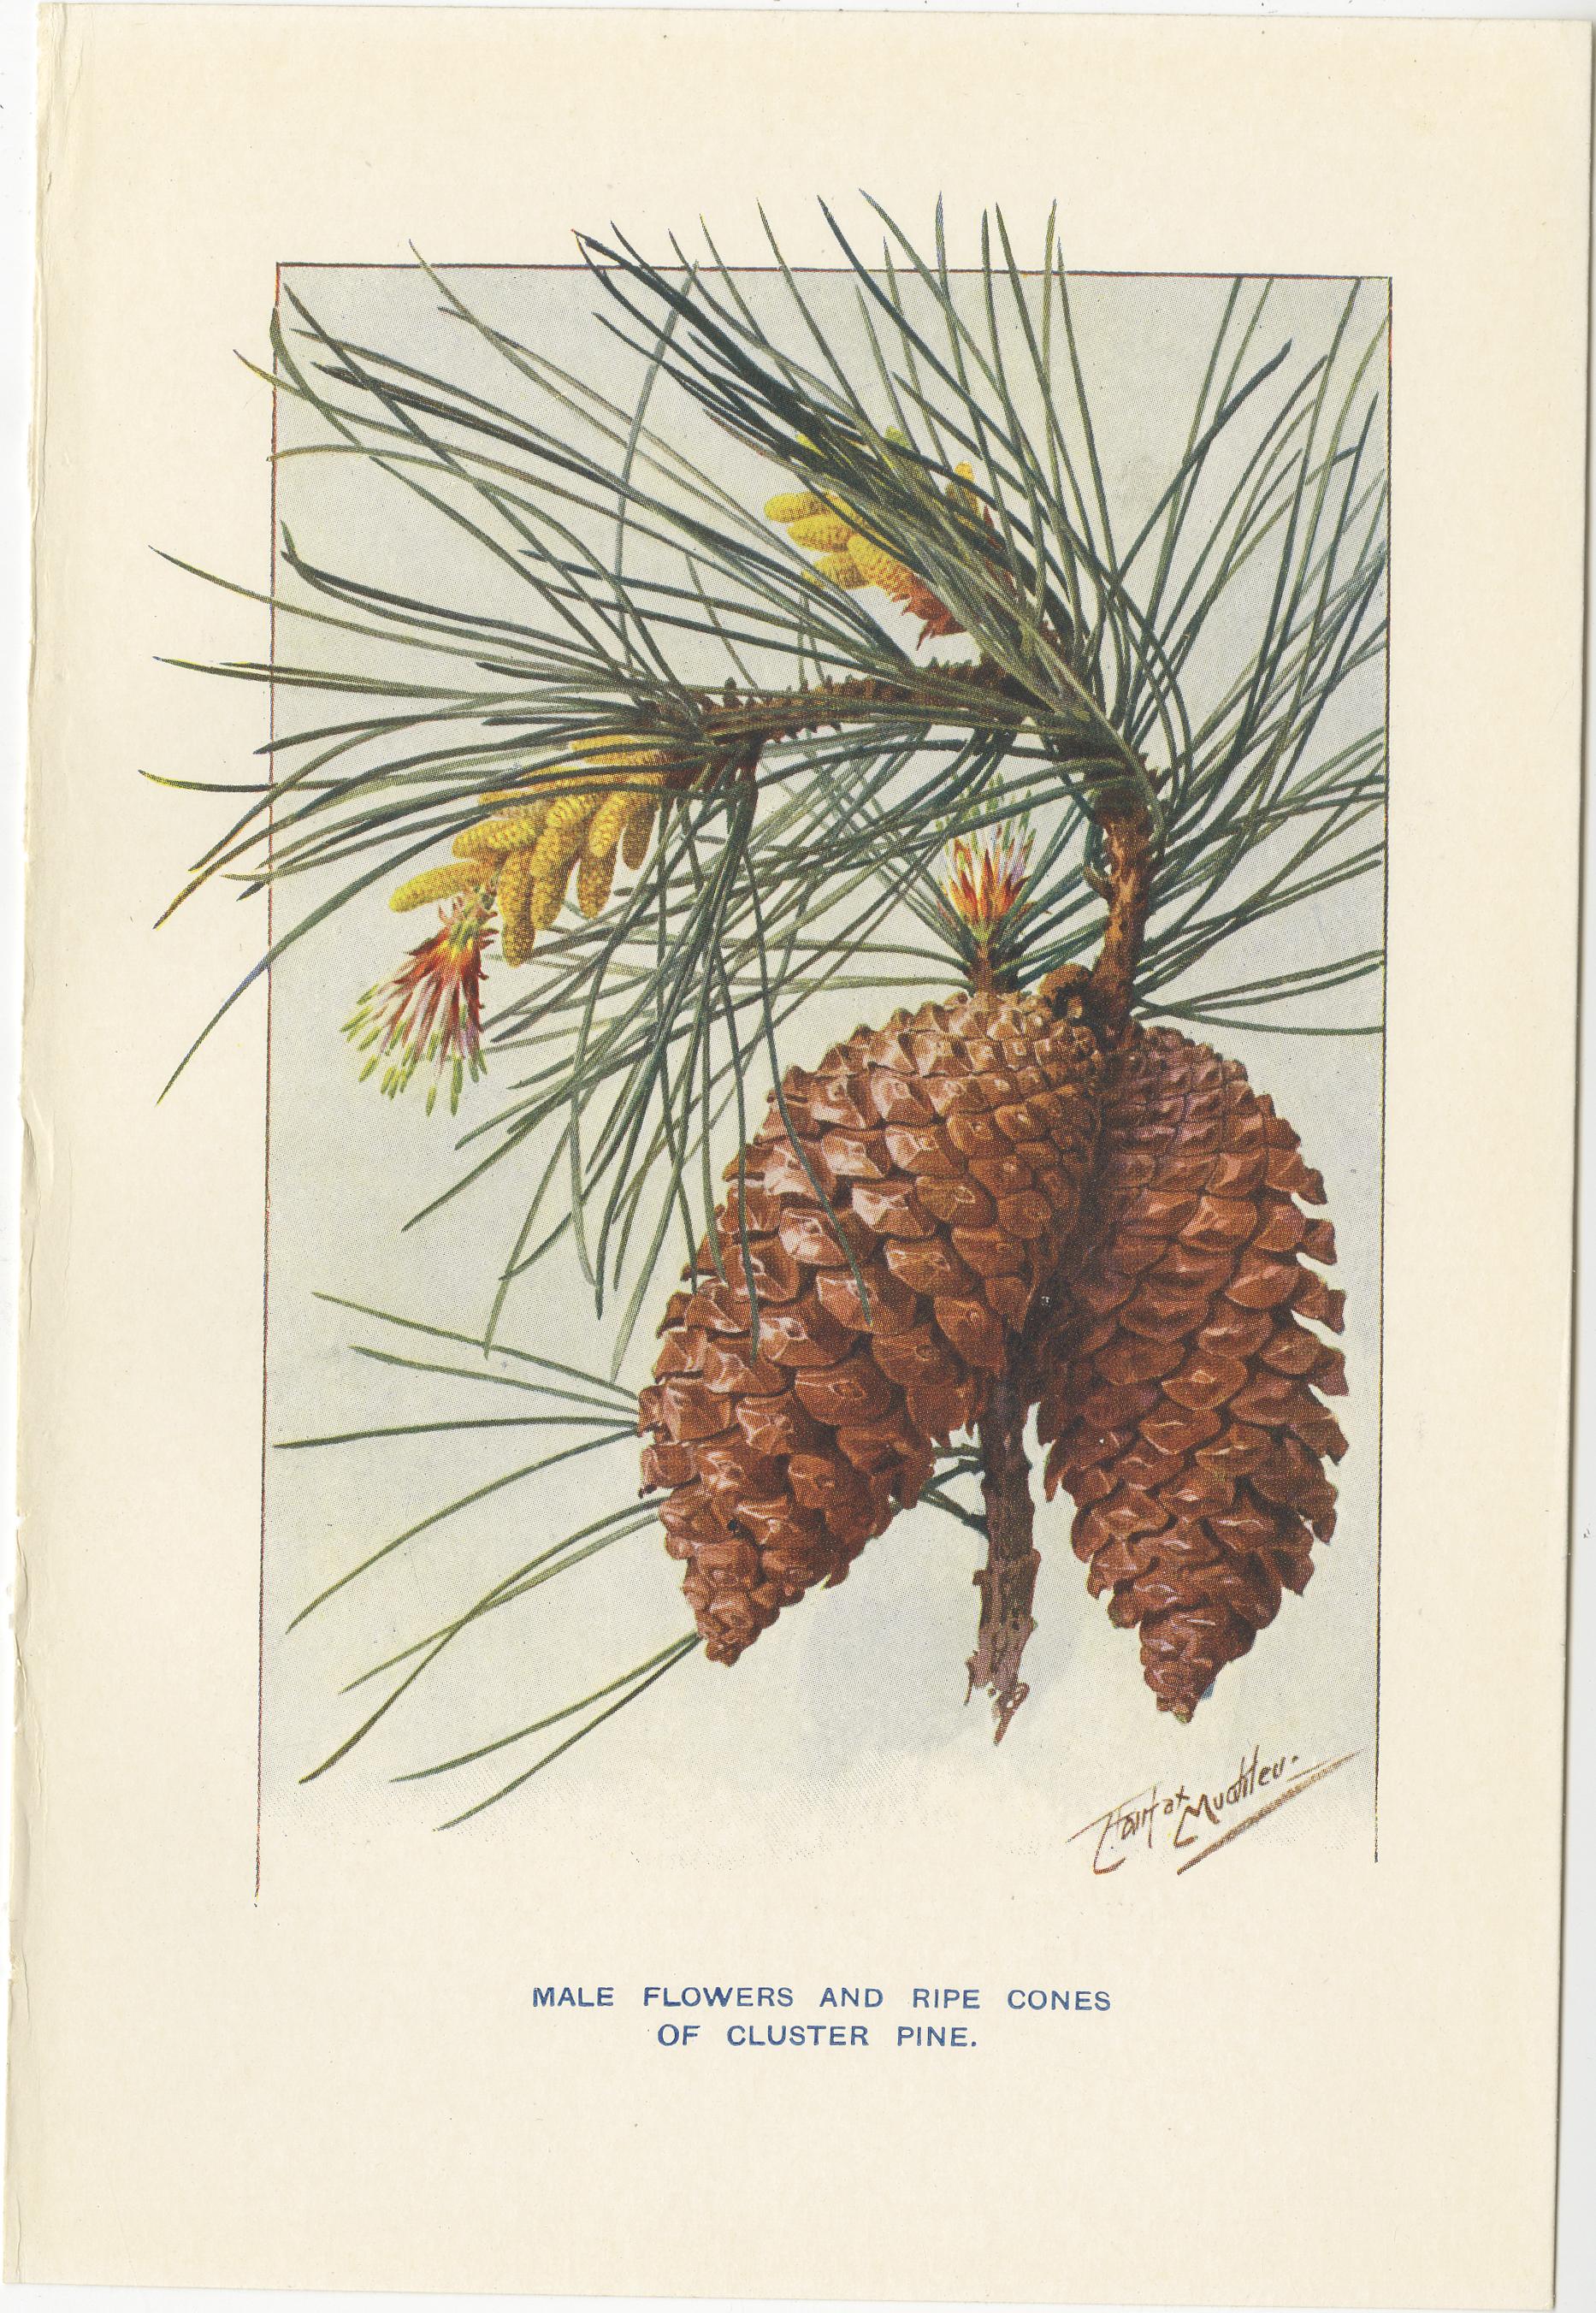 Antique print of various pine trees and pine cones titled 'Shoots and Cone of Wellintonia - Flowers, Cones, and Needles of Corsican Pine - Male Flowers and Ripe Cones of Cluster Pine'. Source unknown, to be determined. Published circa 1930.